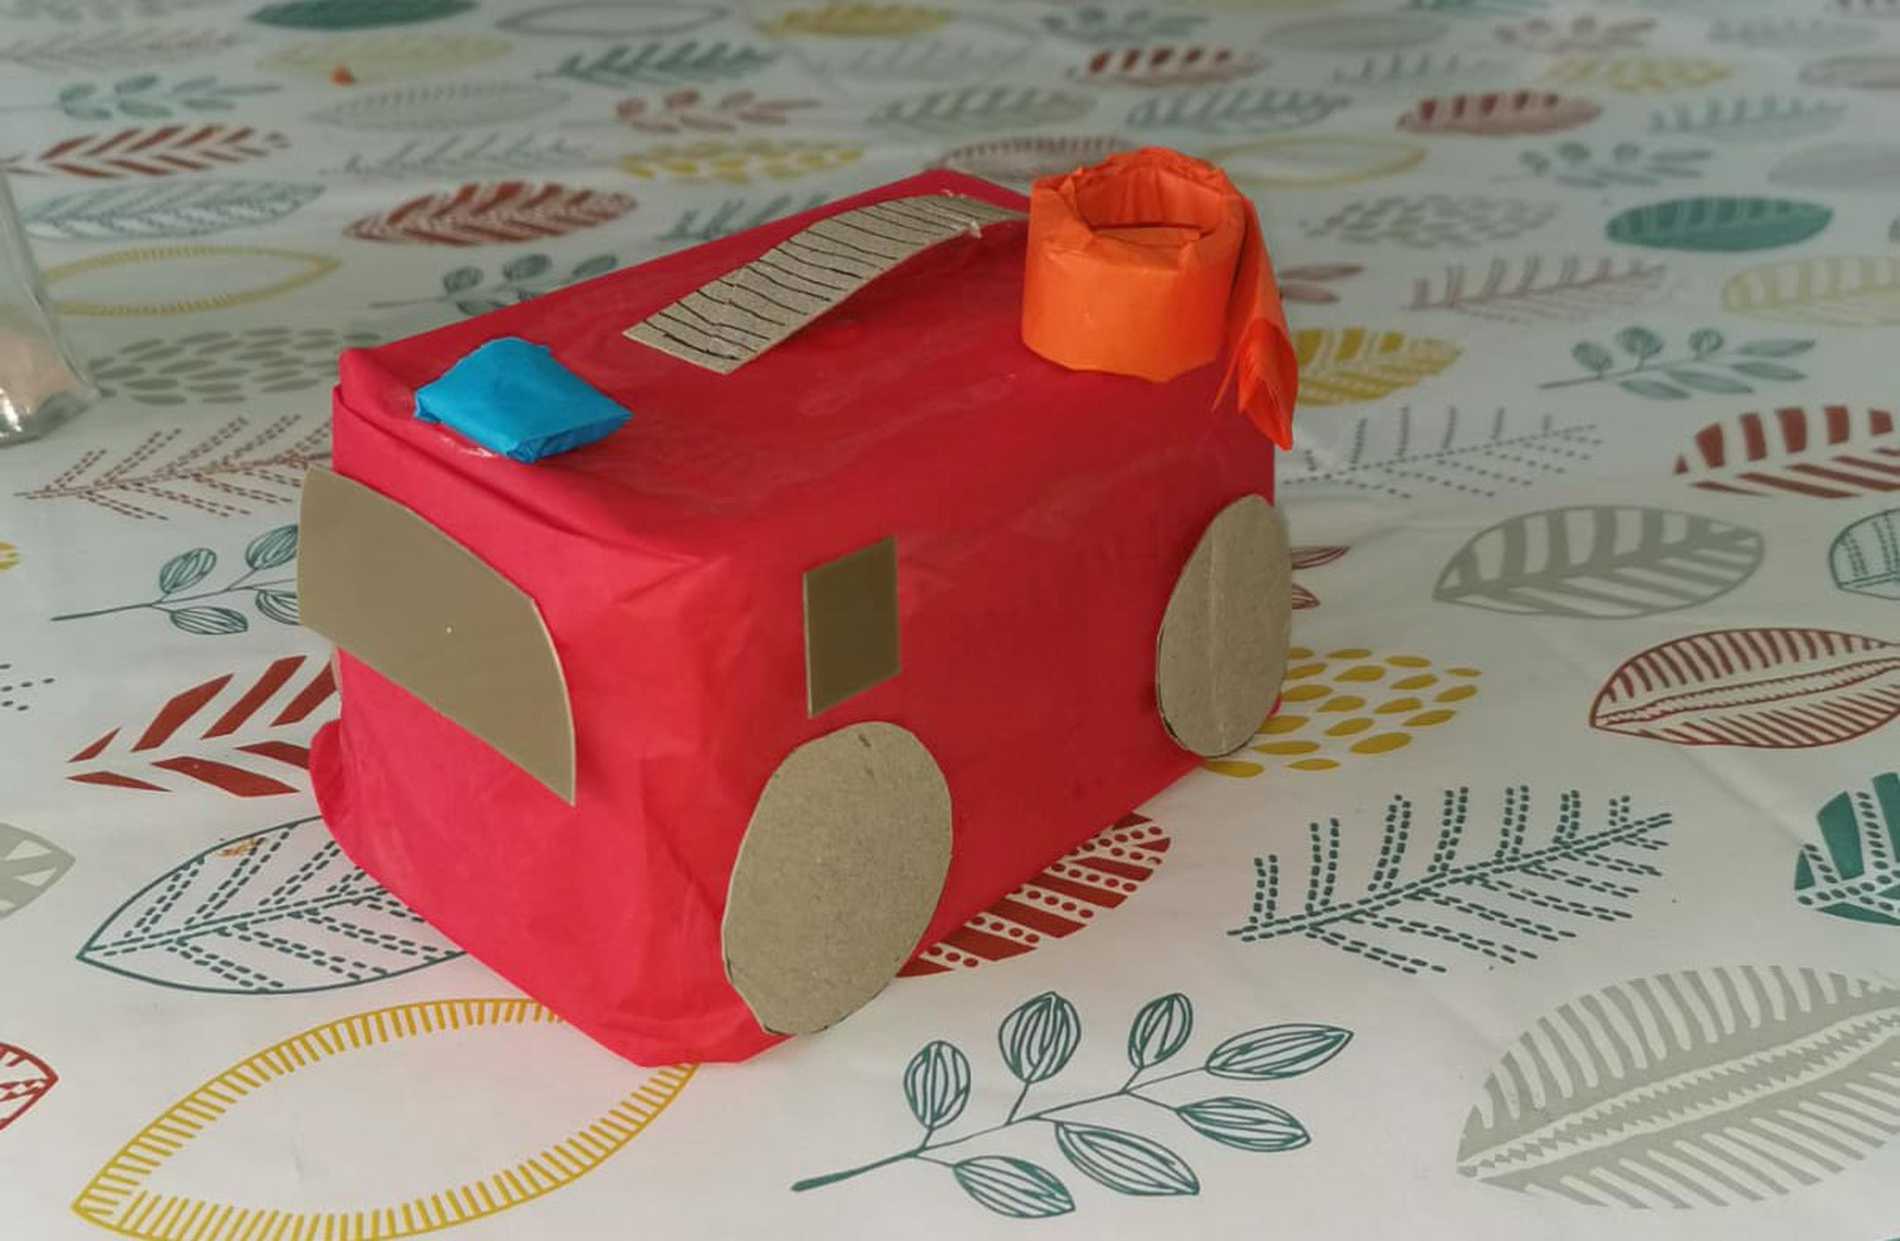 A model of a fire engine created by wish child, Bethany.